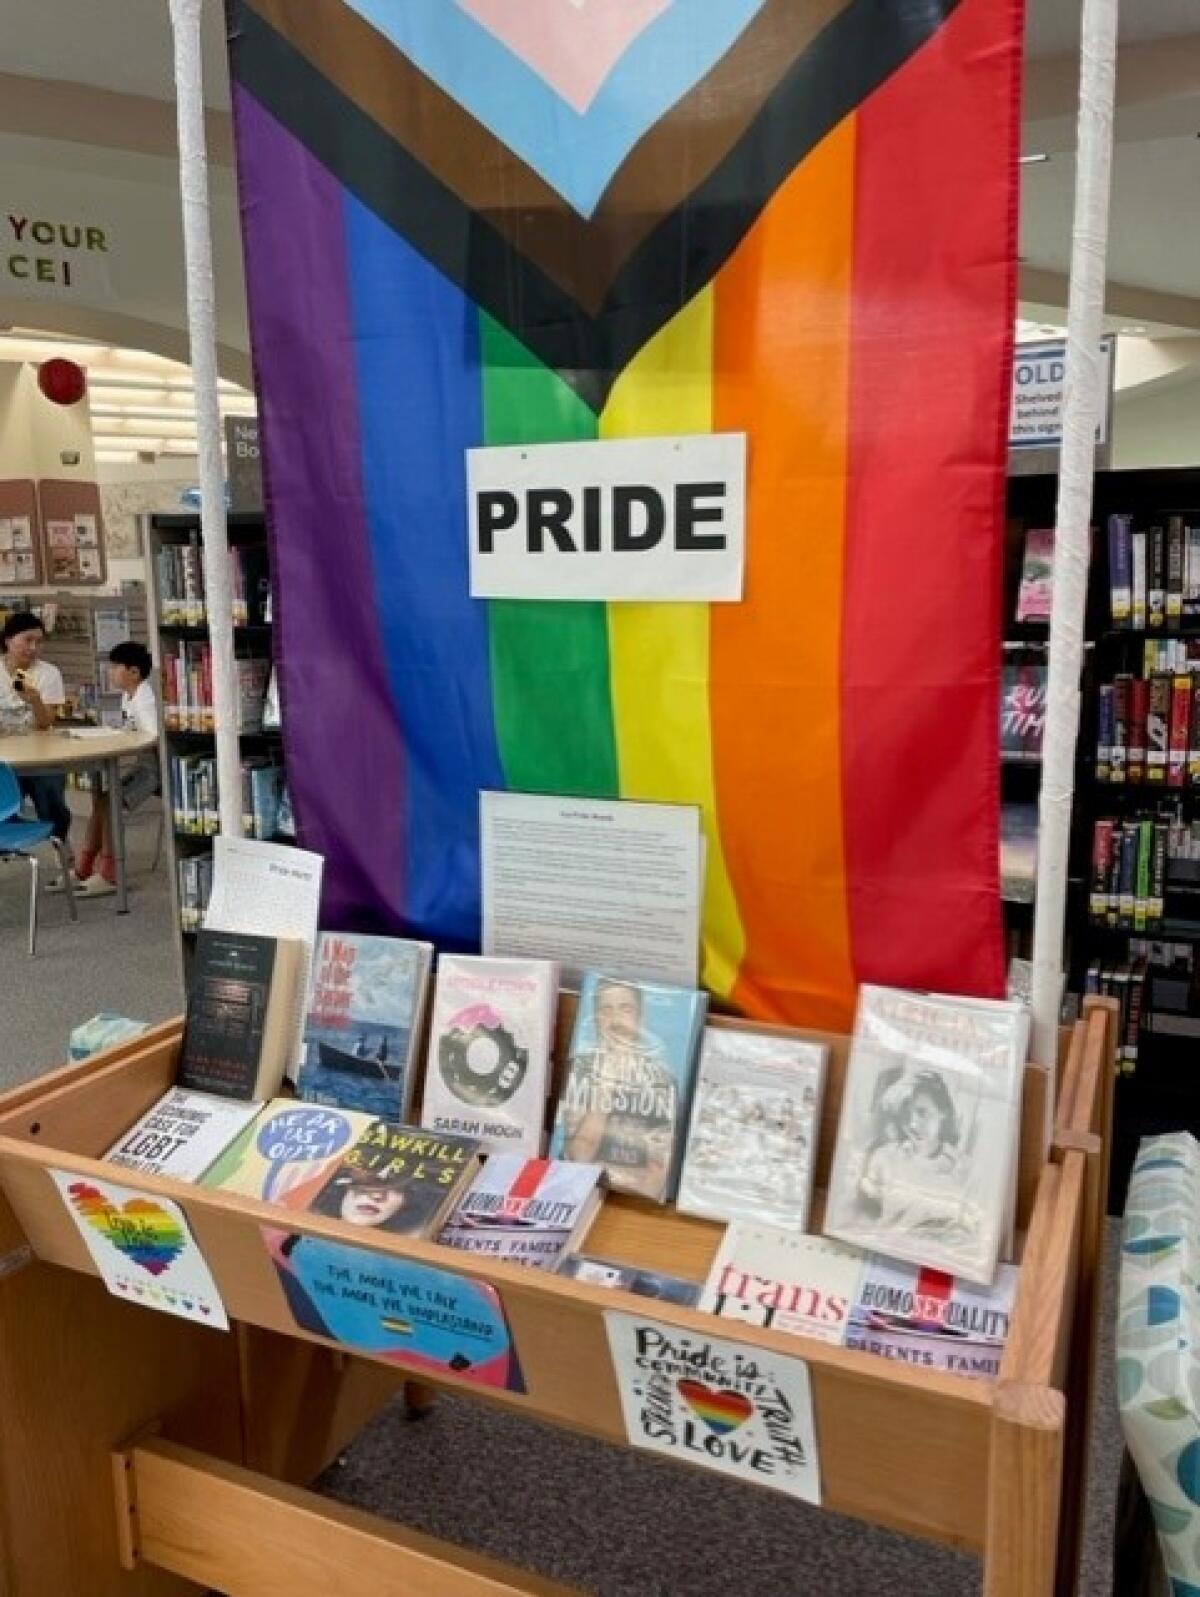 Rancho Penasquitos Library revives Pride display after protest The